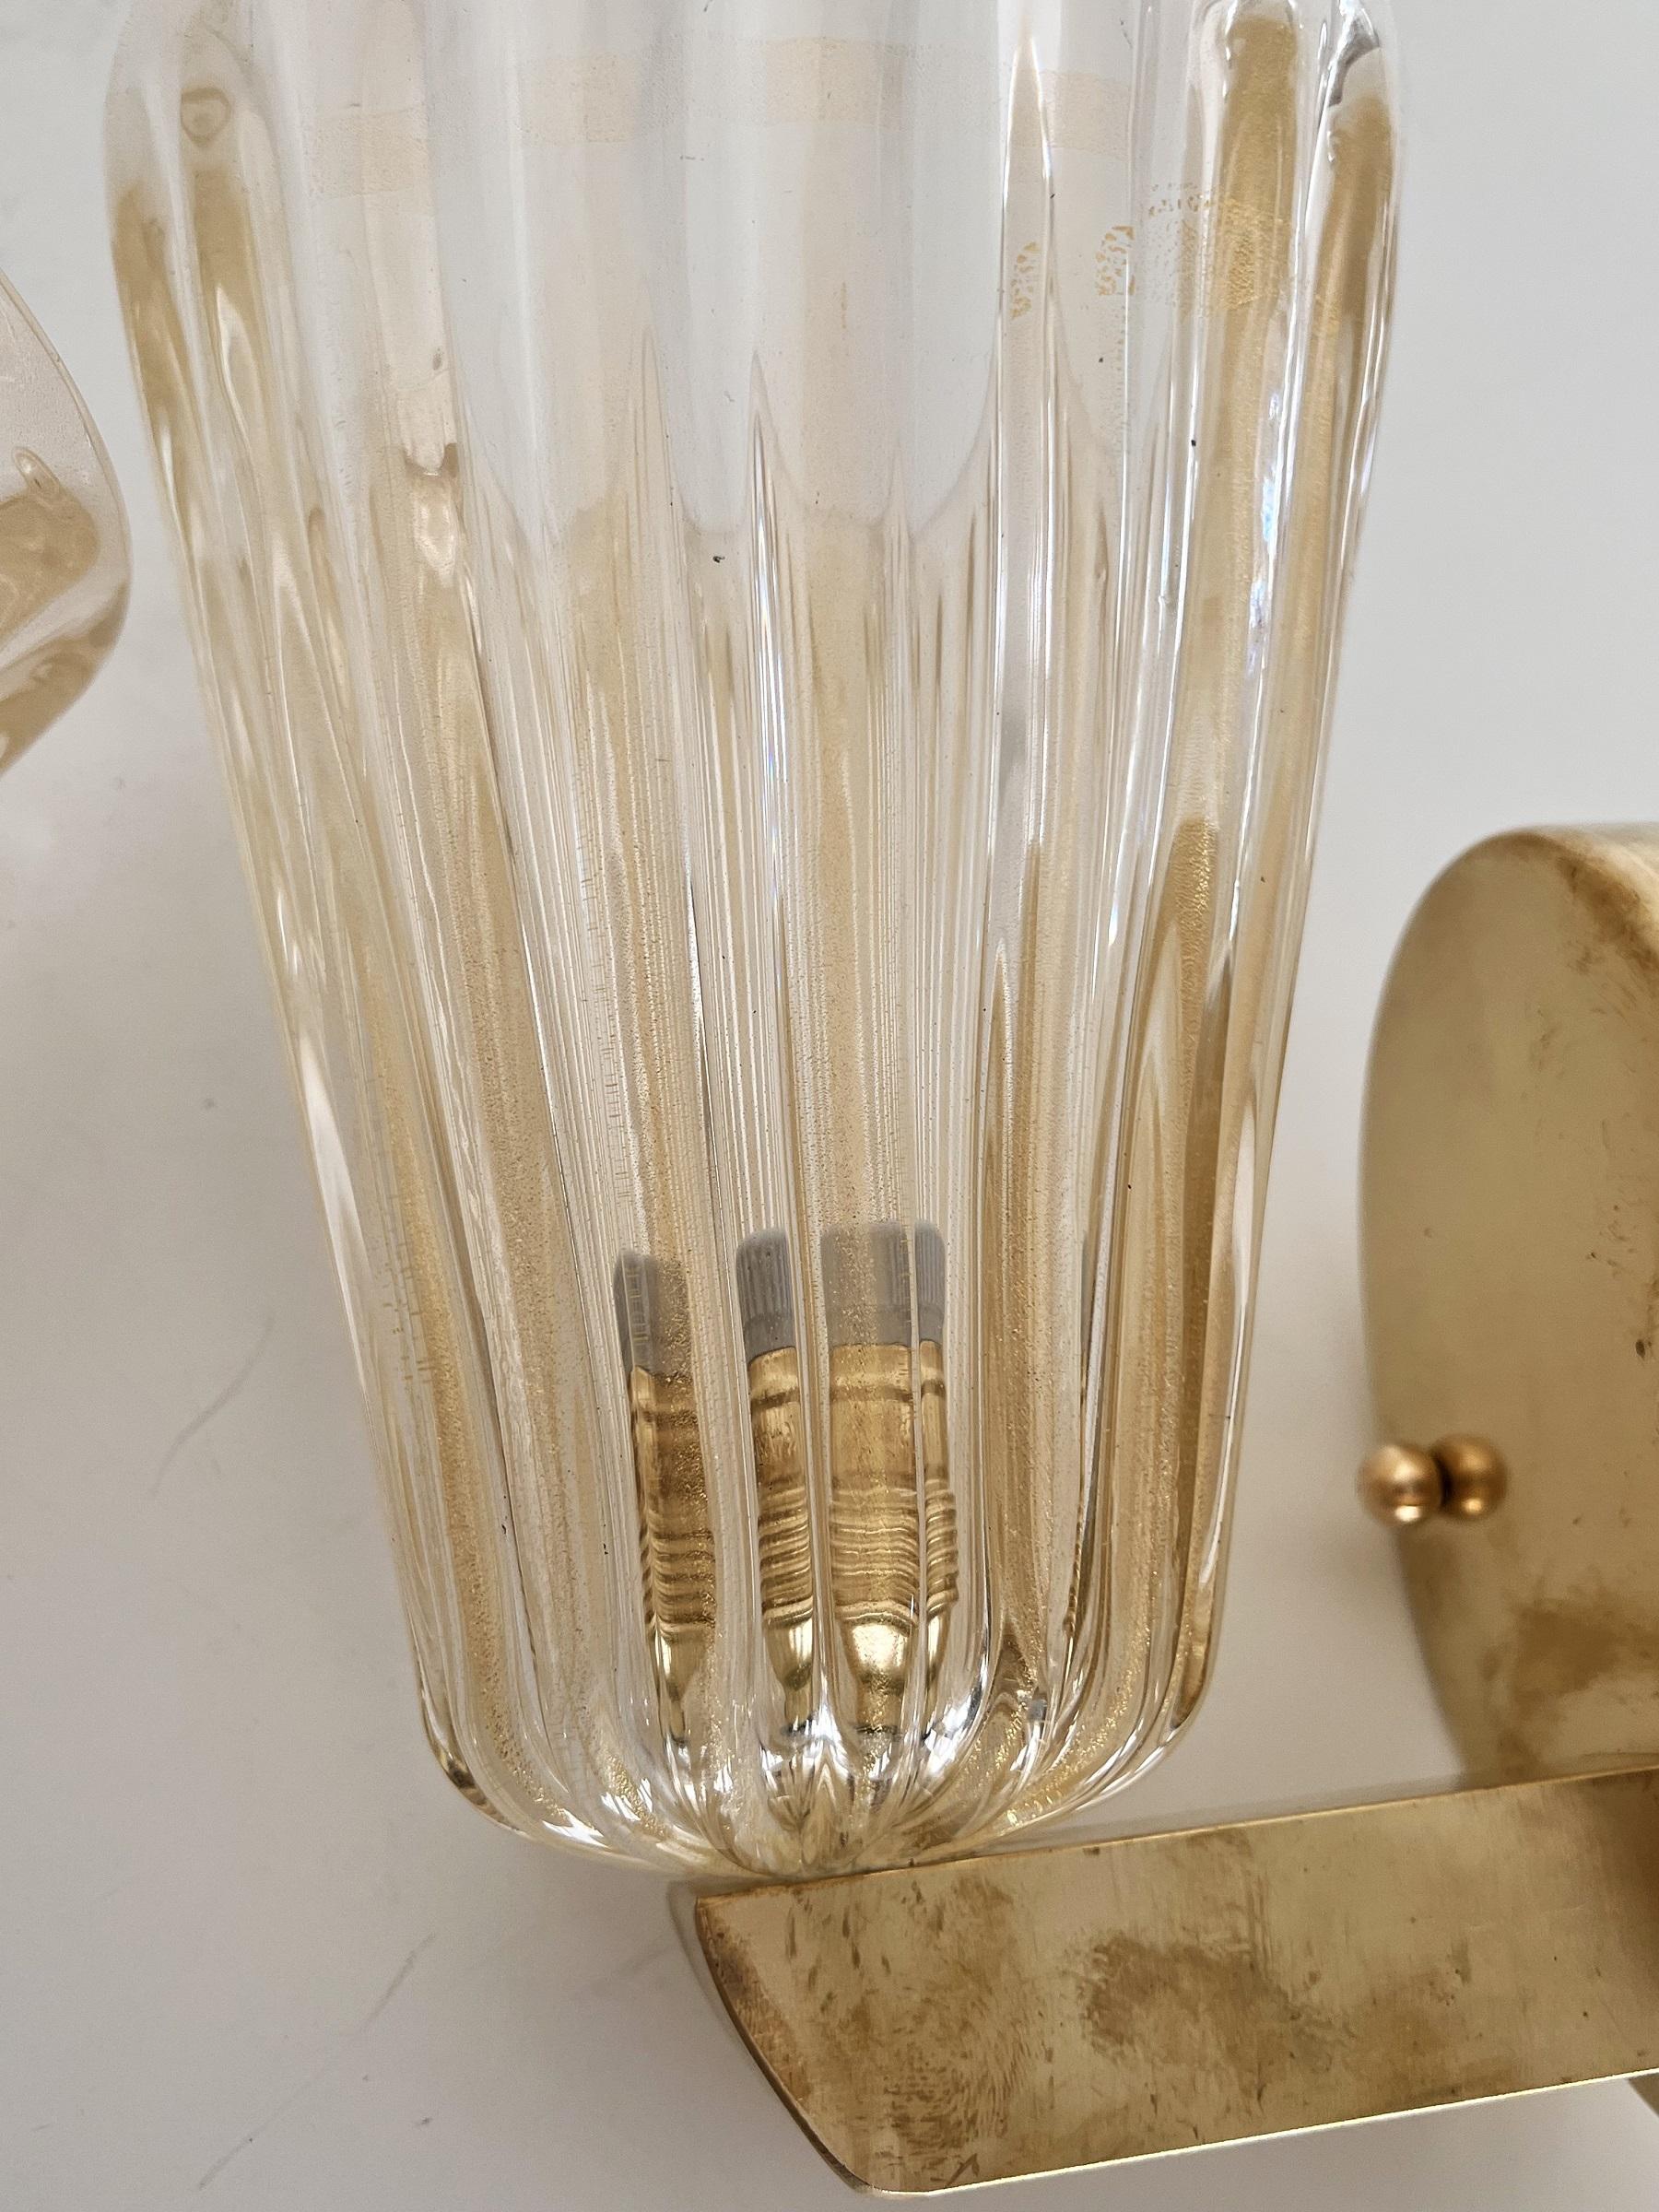 Italian Brass and Murano Glass Wall Lights or Sconces in Art Deco Style, 1990s For Sale 2